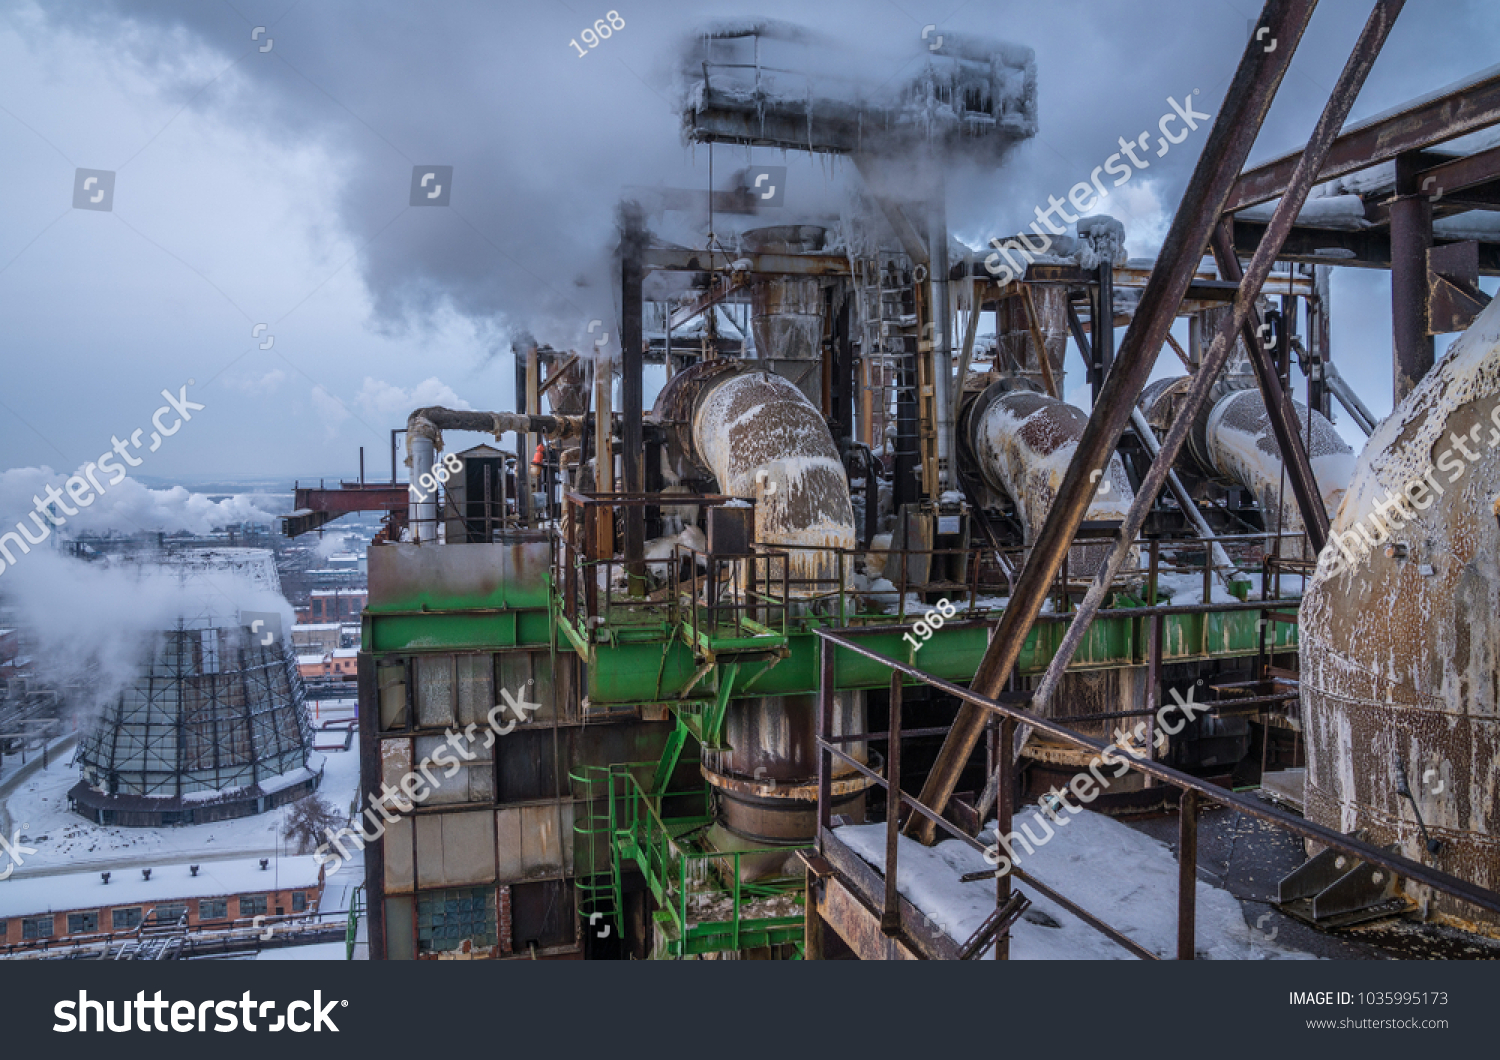 Chemical plant, pipe, building, complex of buildings, smoke #1035995173